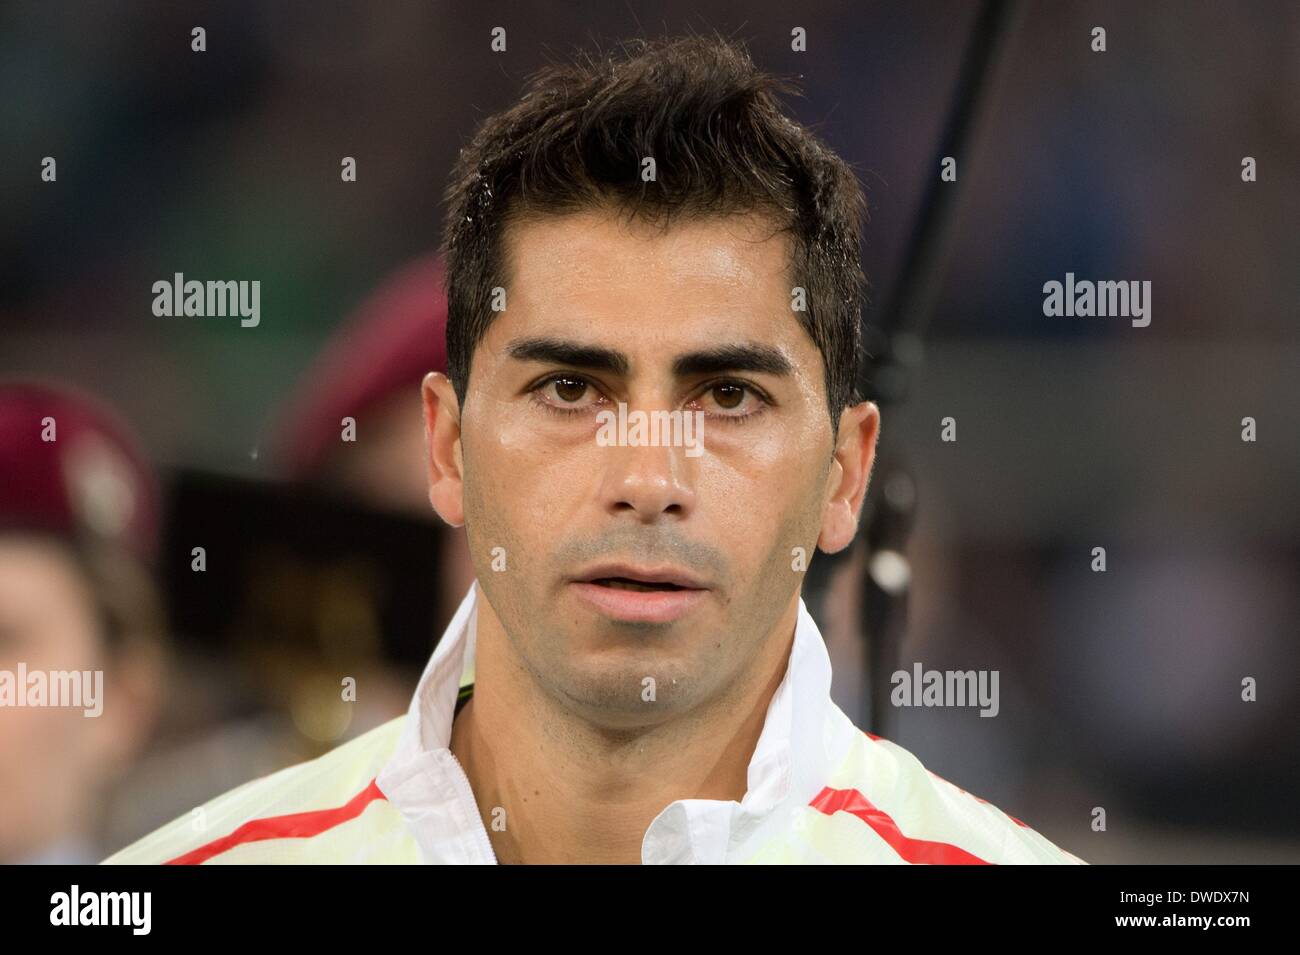 Stuttgart, Germany. 05th Mar, 2014. Chile's goalkeeper Johnny Herrera stands on the pitch before the international friendly match between Germany and Chile at Mercedes-Benz-Arena in Stuttgart, Germany, 05 March 2014. Photo: Sebastian Kahnert/dpa/Alamy Live News Stock Photo